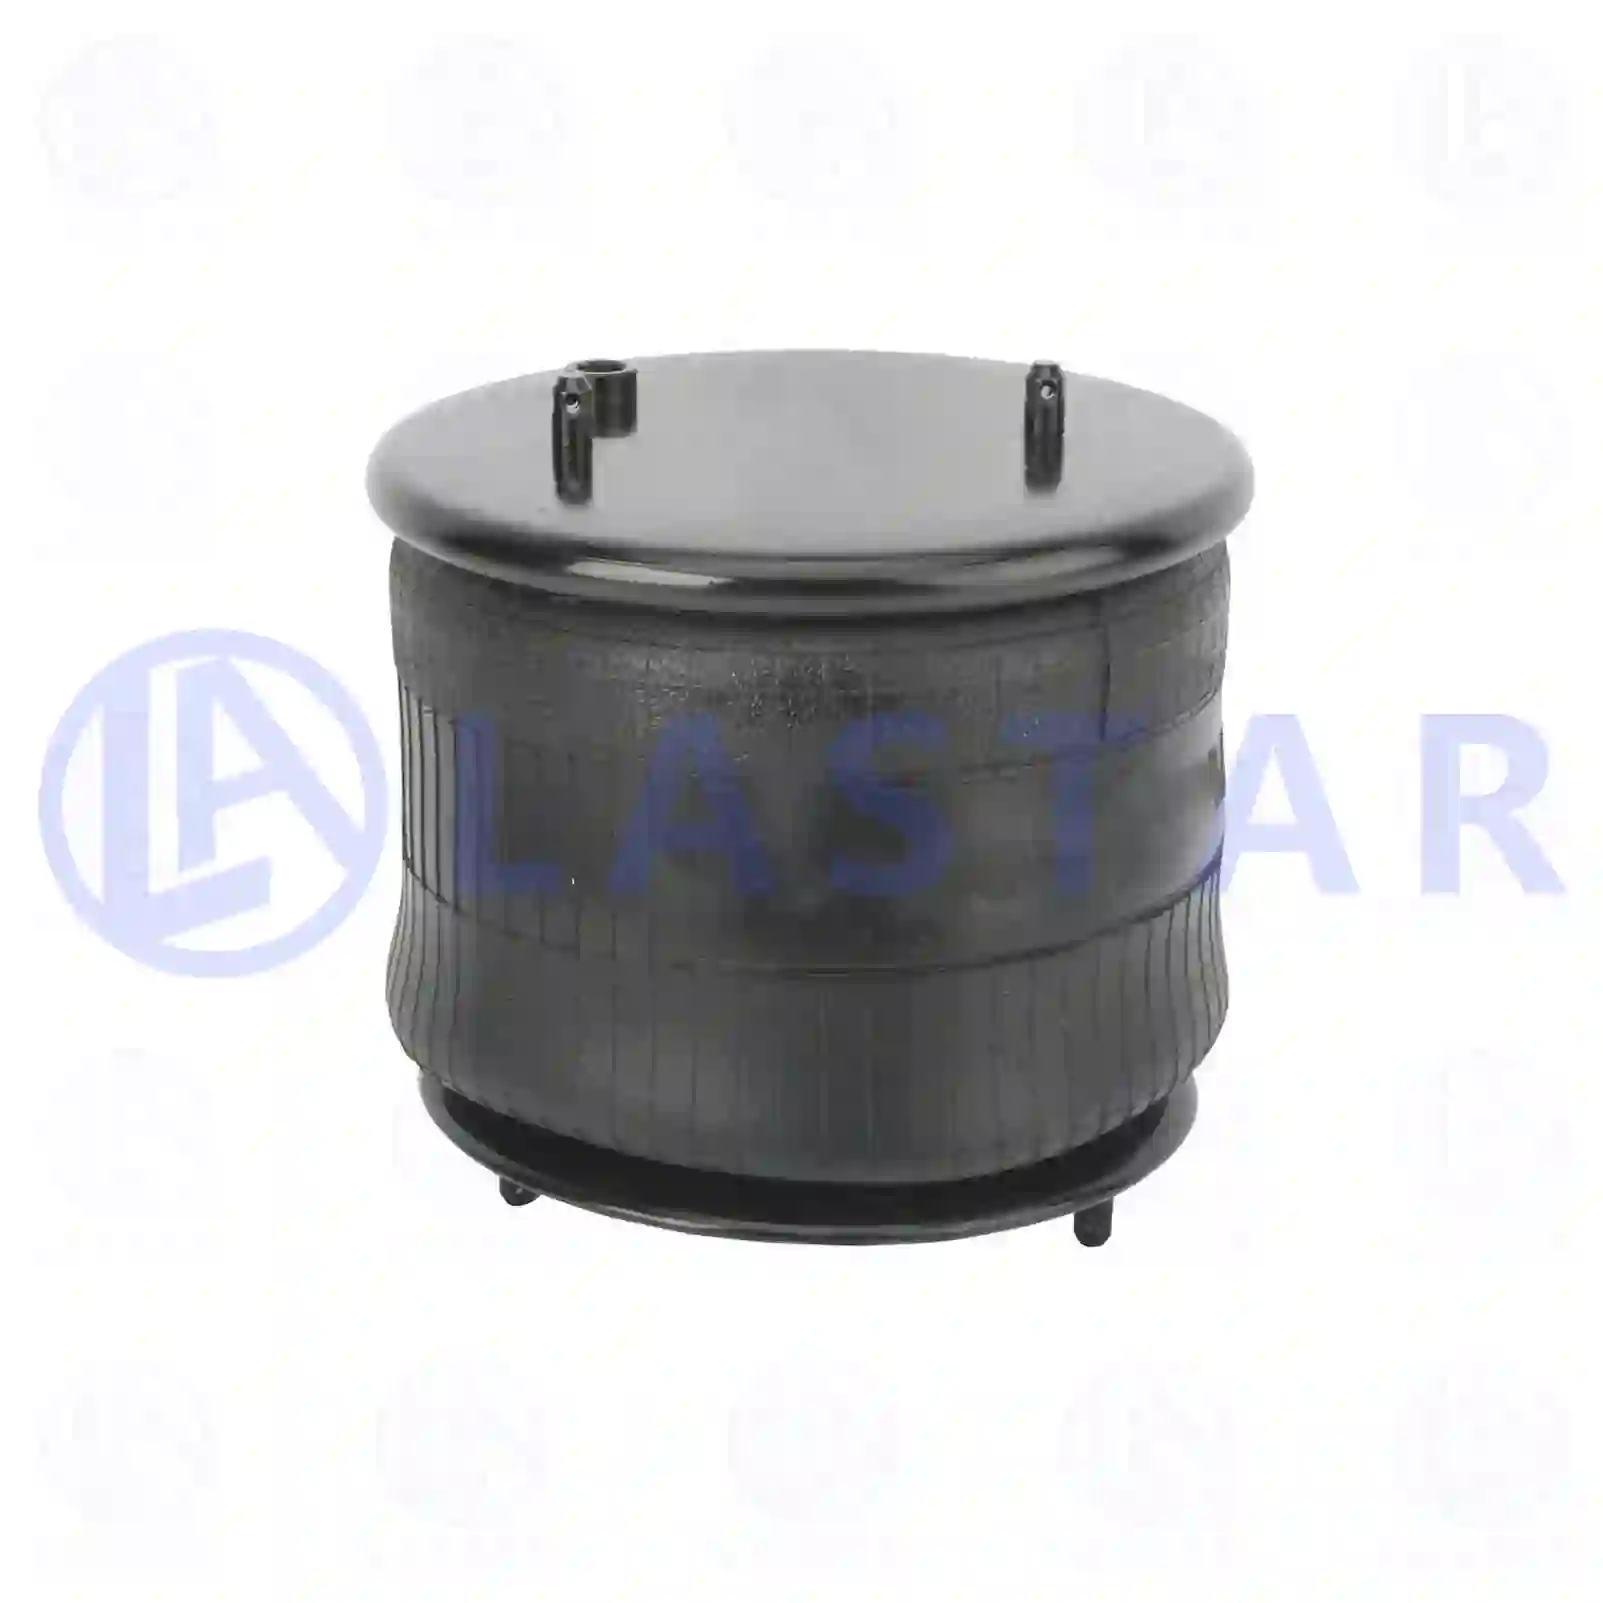 Air spring, with steel piston, 77727073, 1726237, 2024281, ZG40741-0008, ||  77727073 Lastar Spare Part | Truck Spare Parts, Auotomotive Spare Parts Air spring, with steel piston, 77727073, 1726237, 2024281, ZG40741-0008, ||  77727073 Lastar Spare Part | Truck Spare Parts, Auotomotive Spare Parts